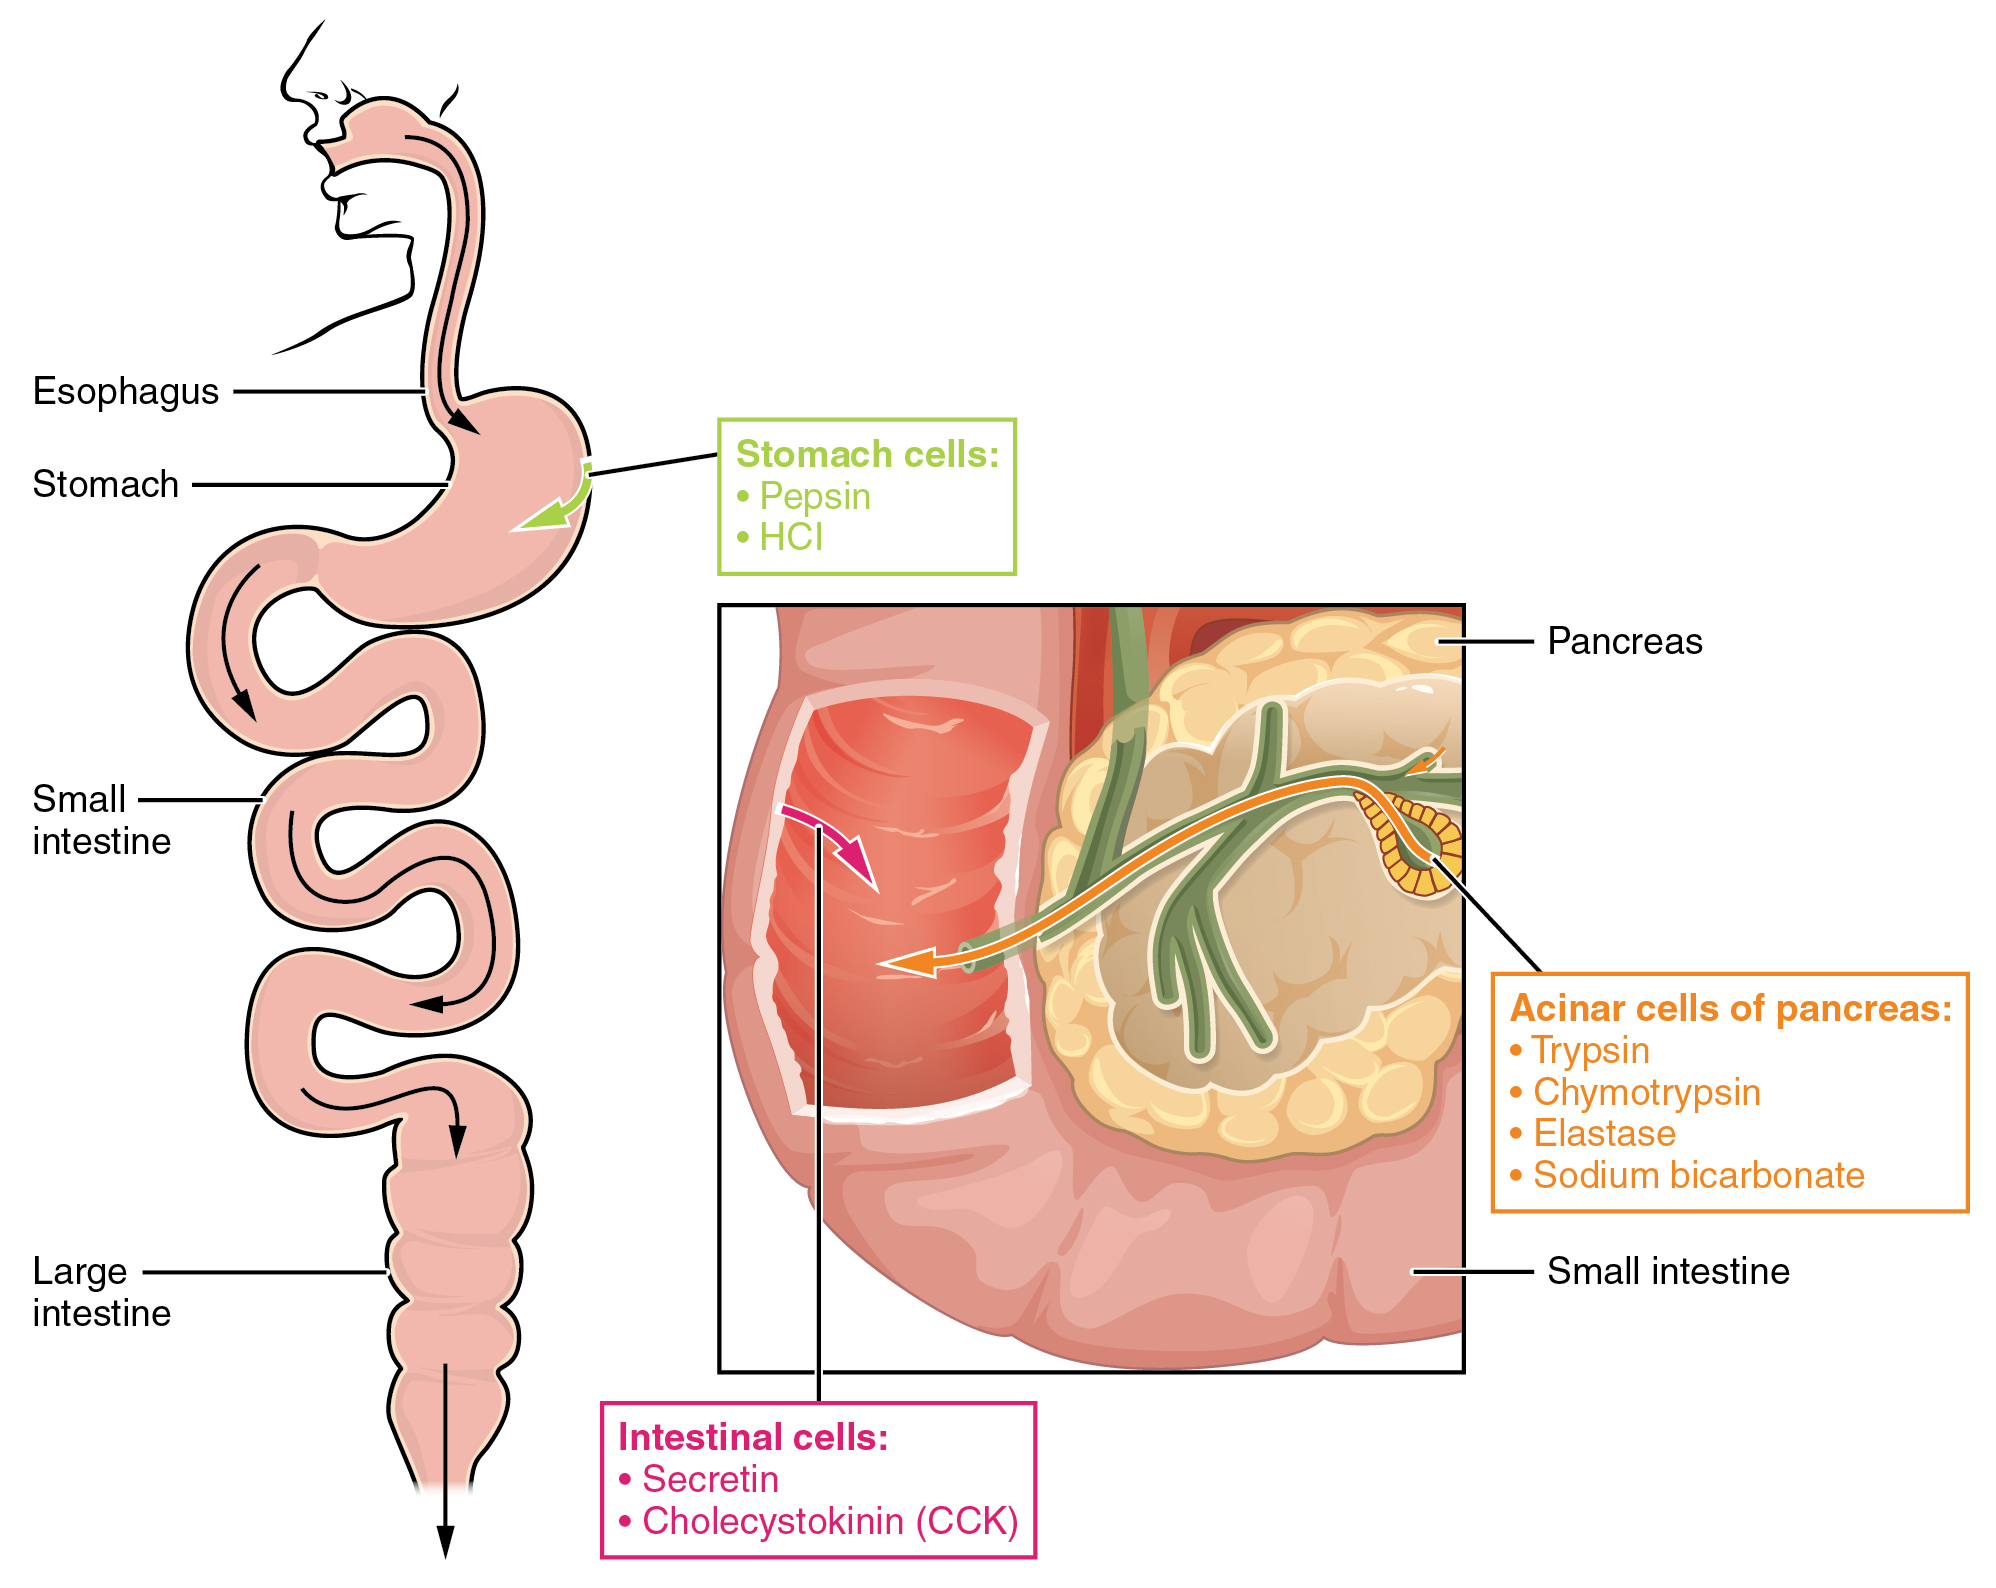 The left panel shows the main organs of the digestive system, and the right panel shows a magnified view of the intestine. Text callouts indicate the different protein digesting enzymes produced in different organs.